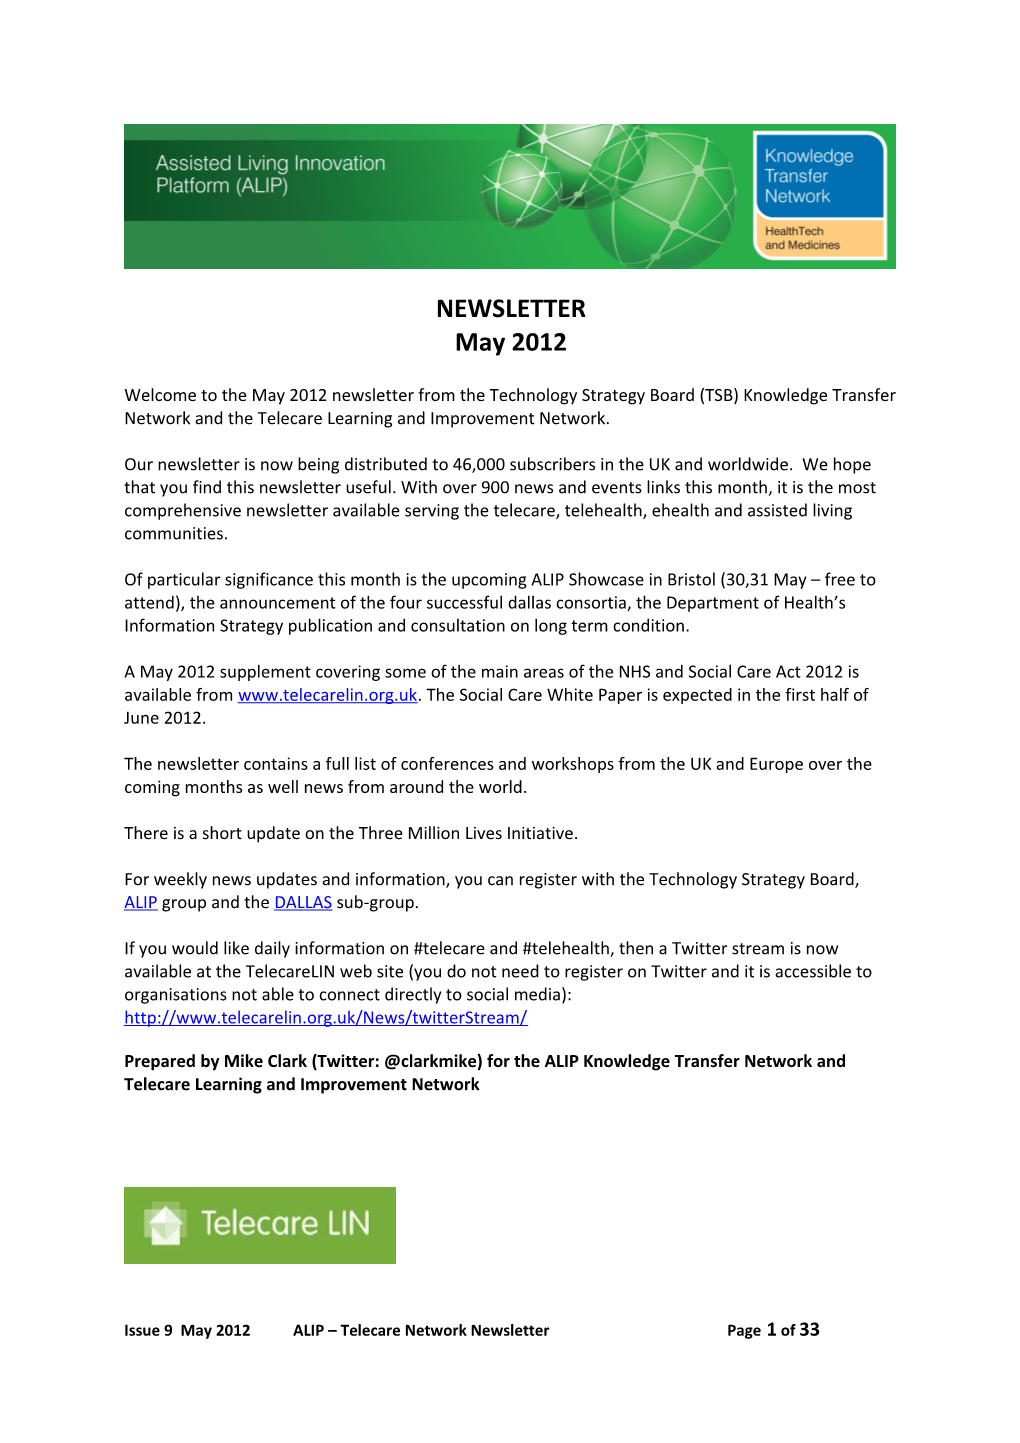 Welcome to the May2012 Newsletter from the Technology Strategy Board (TSB) Knowledge Transfer